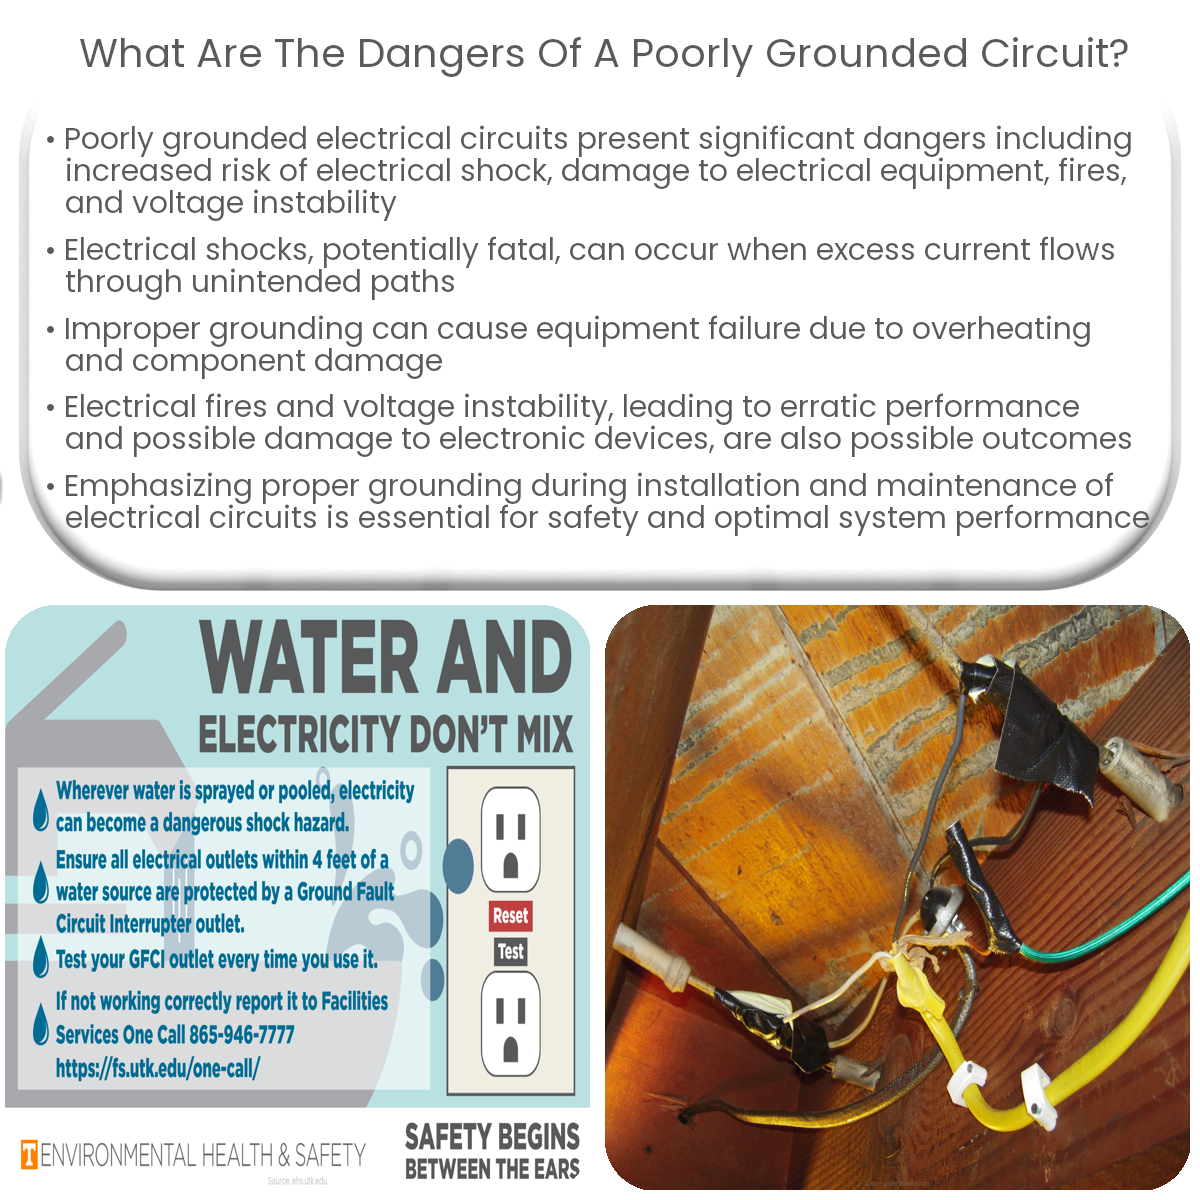 What are the dangers of a poorly grounded circuit?